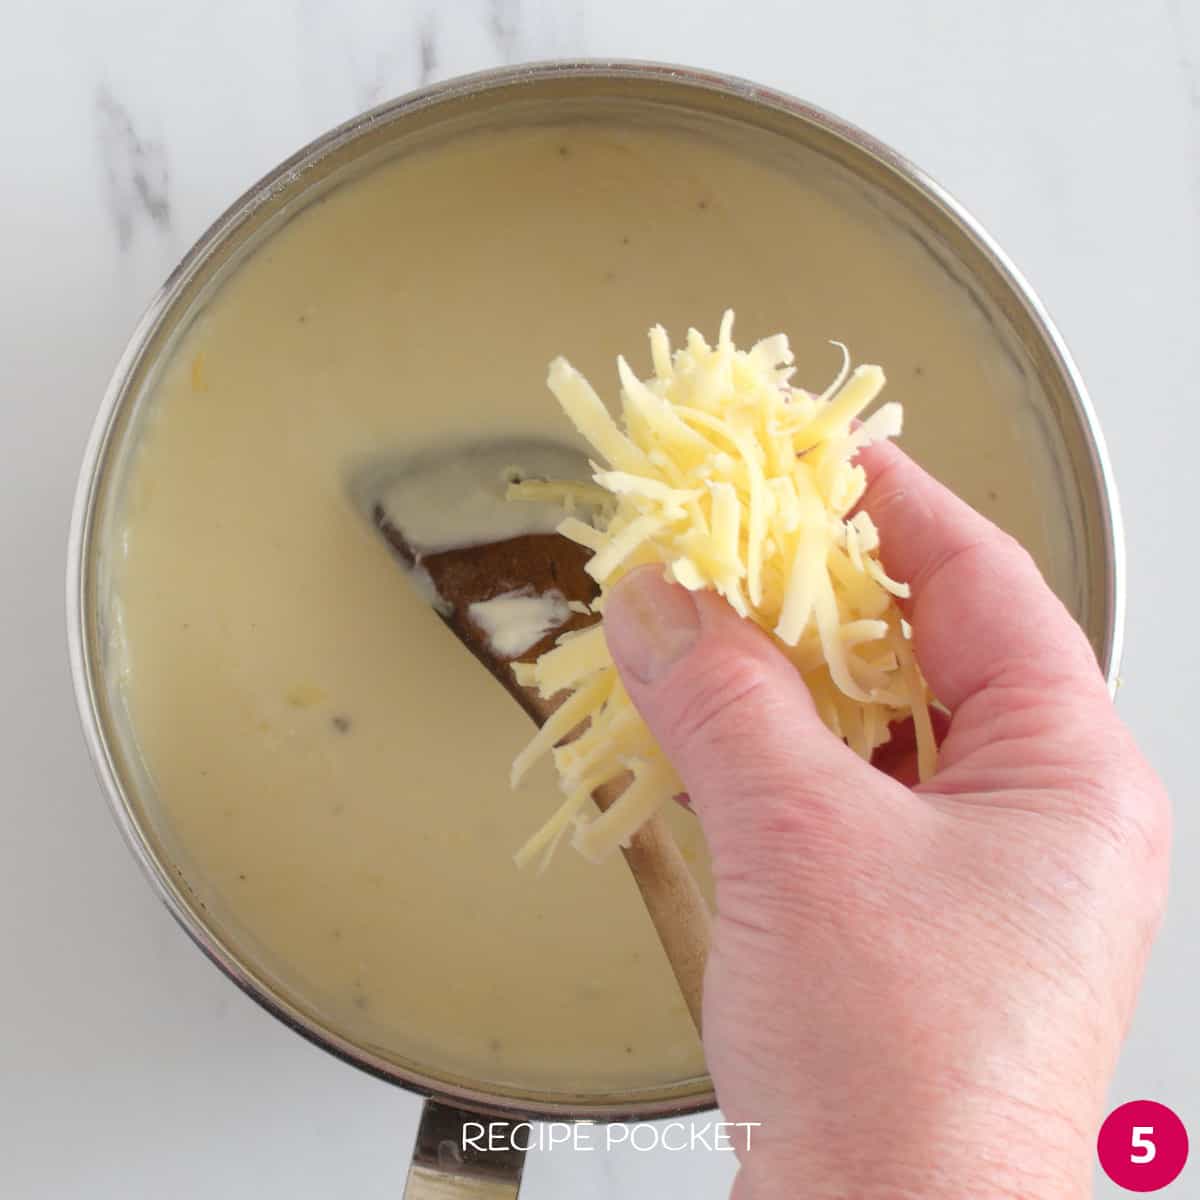 Cheese being added to mac and cheese sauce.